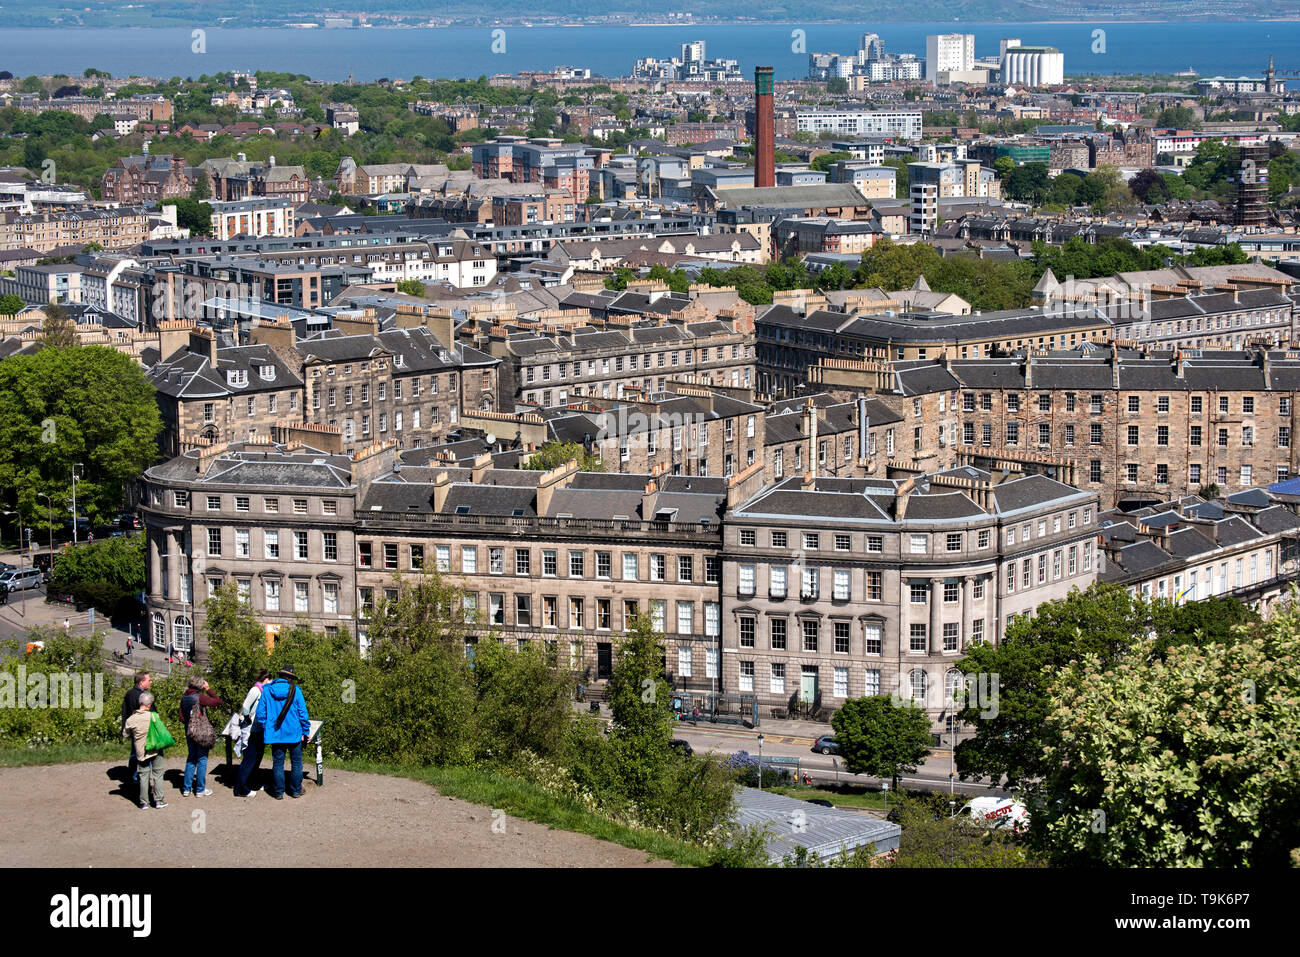 Tourists on Calton Hill take in the views of Leith, Leith and the Firth of Forth. Stock Photo